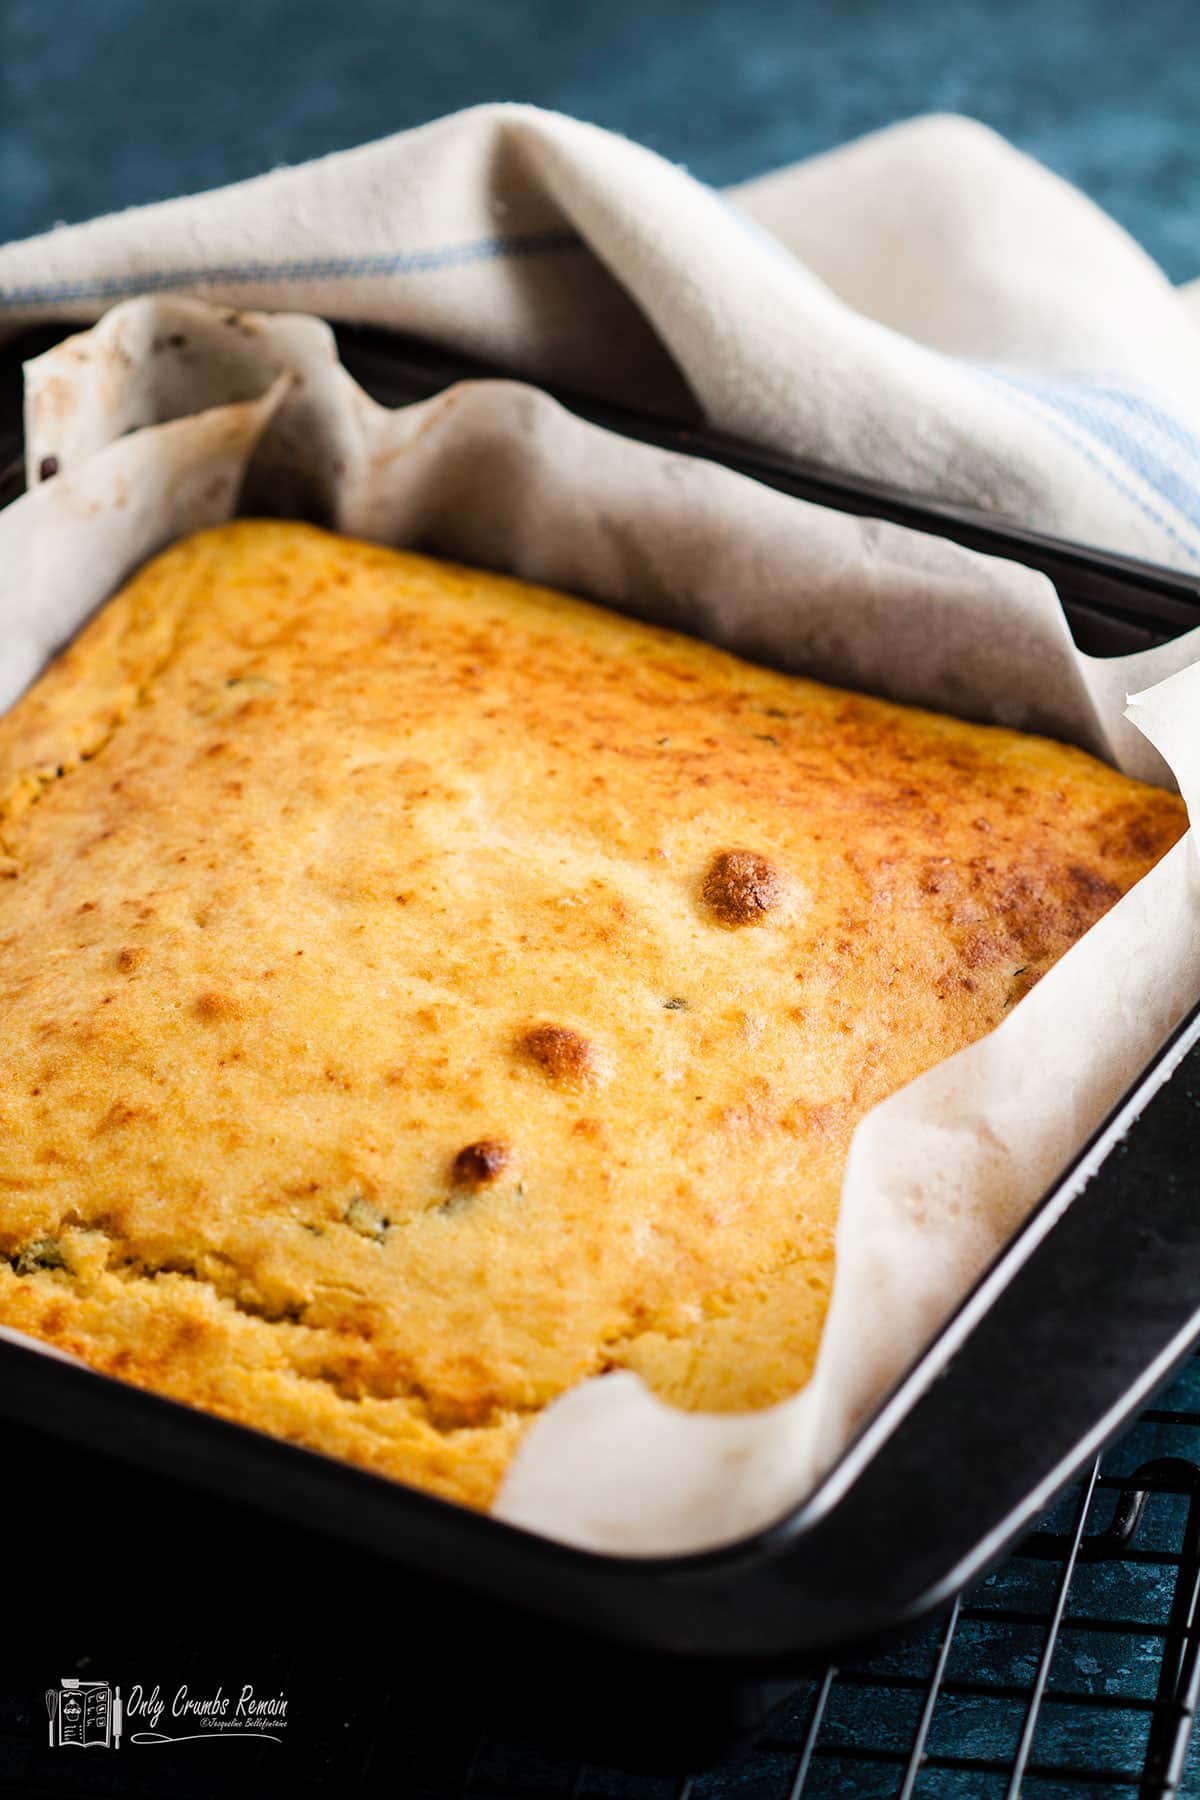 Cornbread with sundried tomatoes and basil in a baking tin.